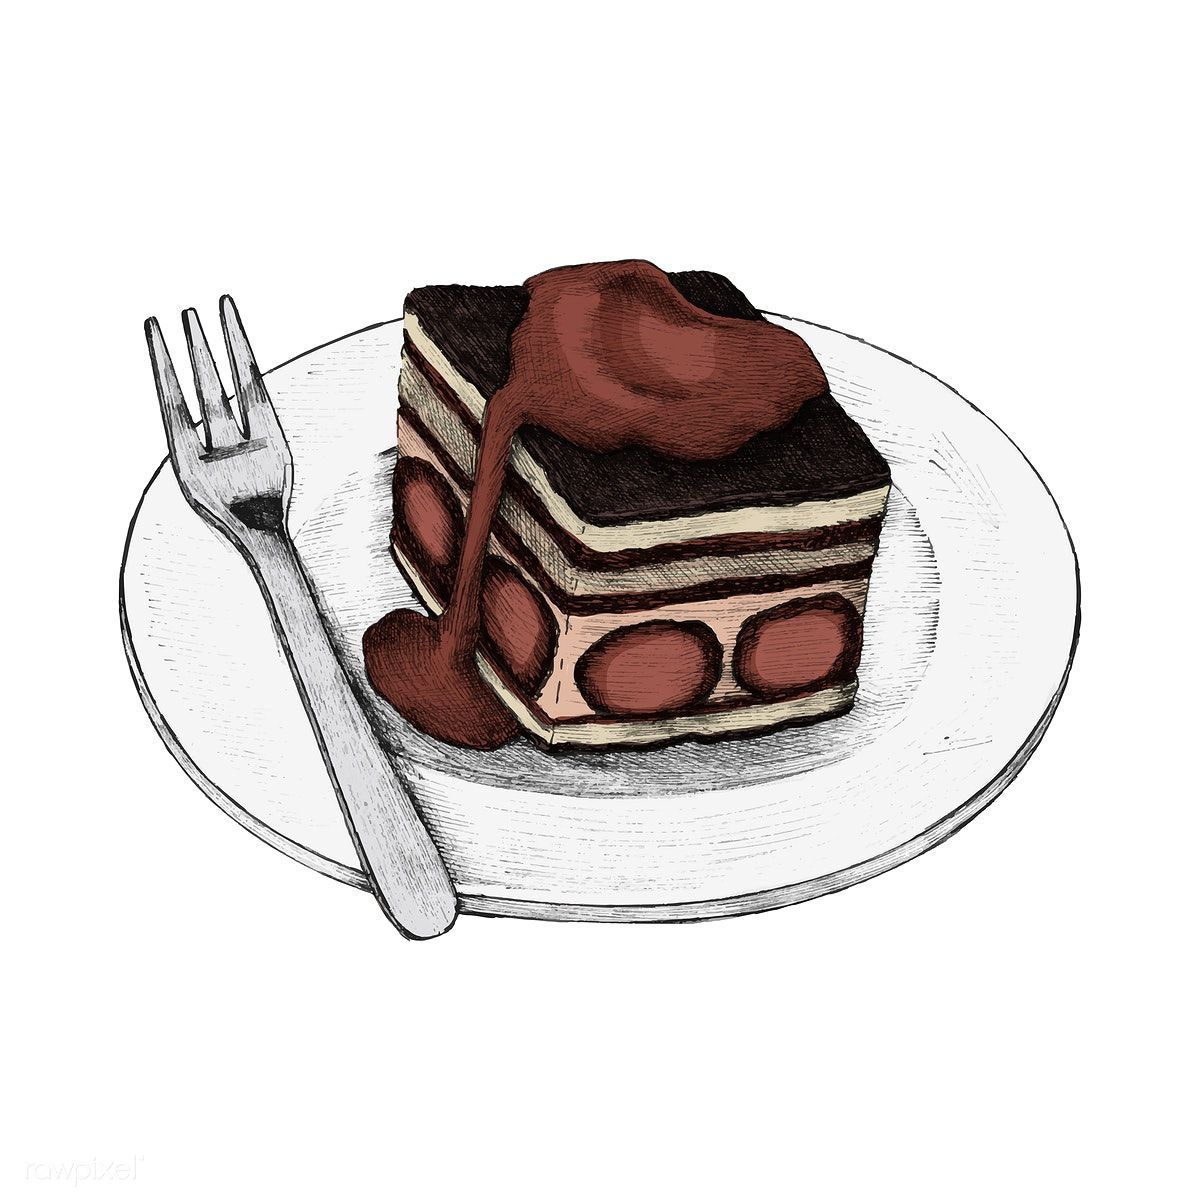 Download premium vector of illustration of a layered cake 410605 -   12 layer cake Drawing
 ideas